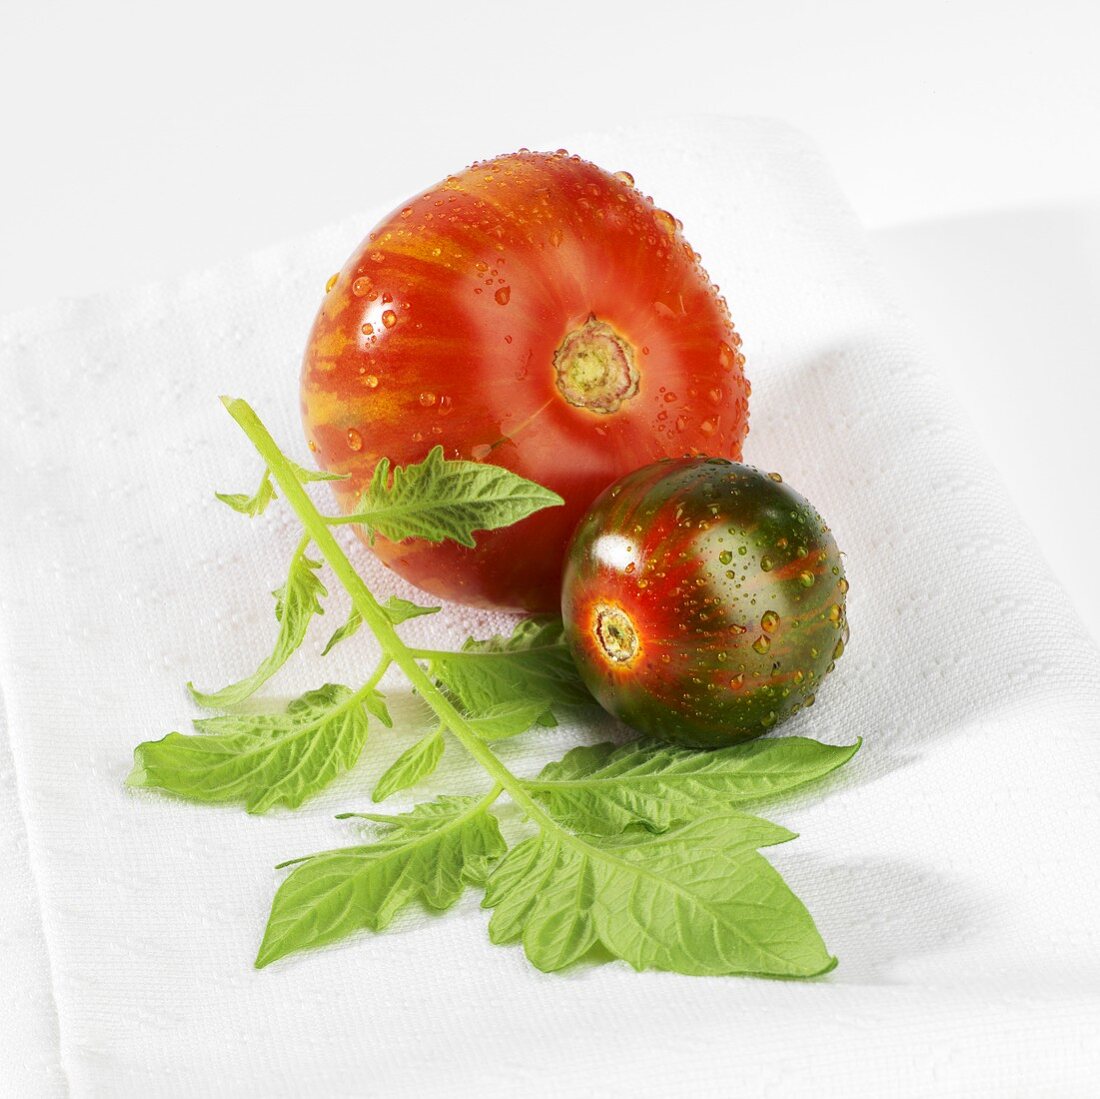 Two tomatoes with drops of water and leaf